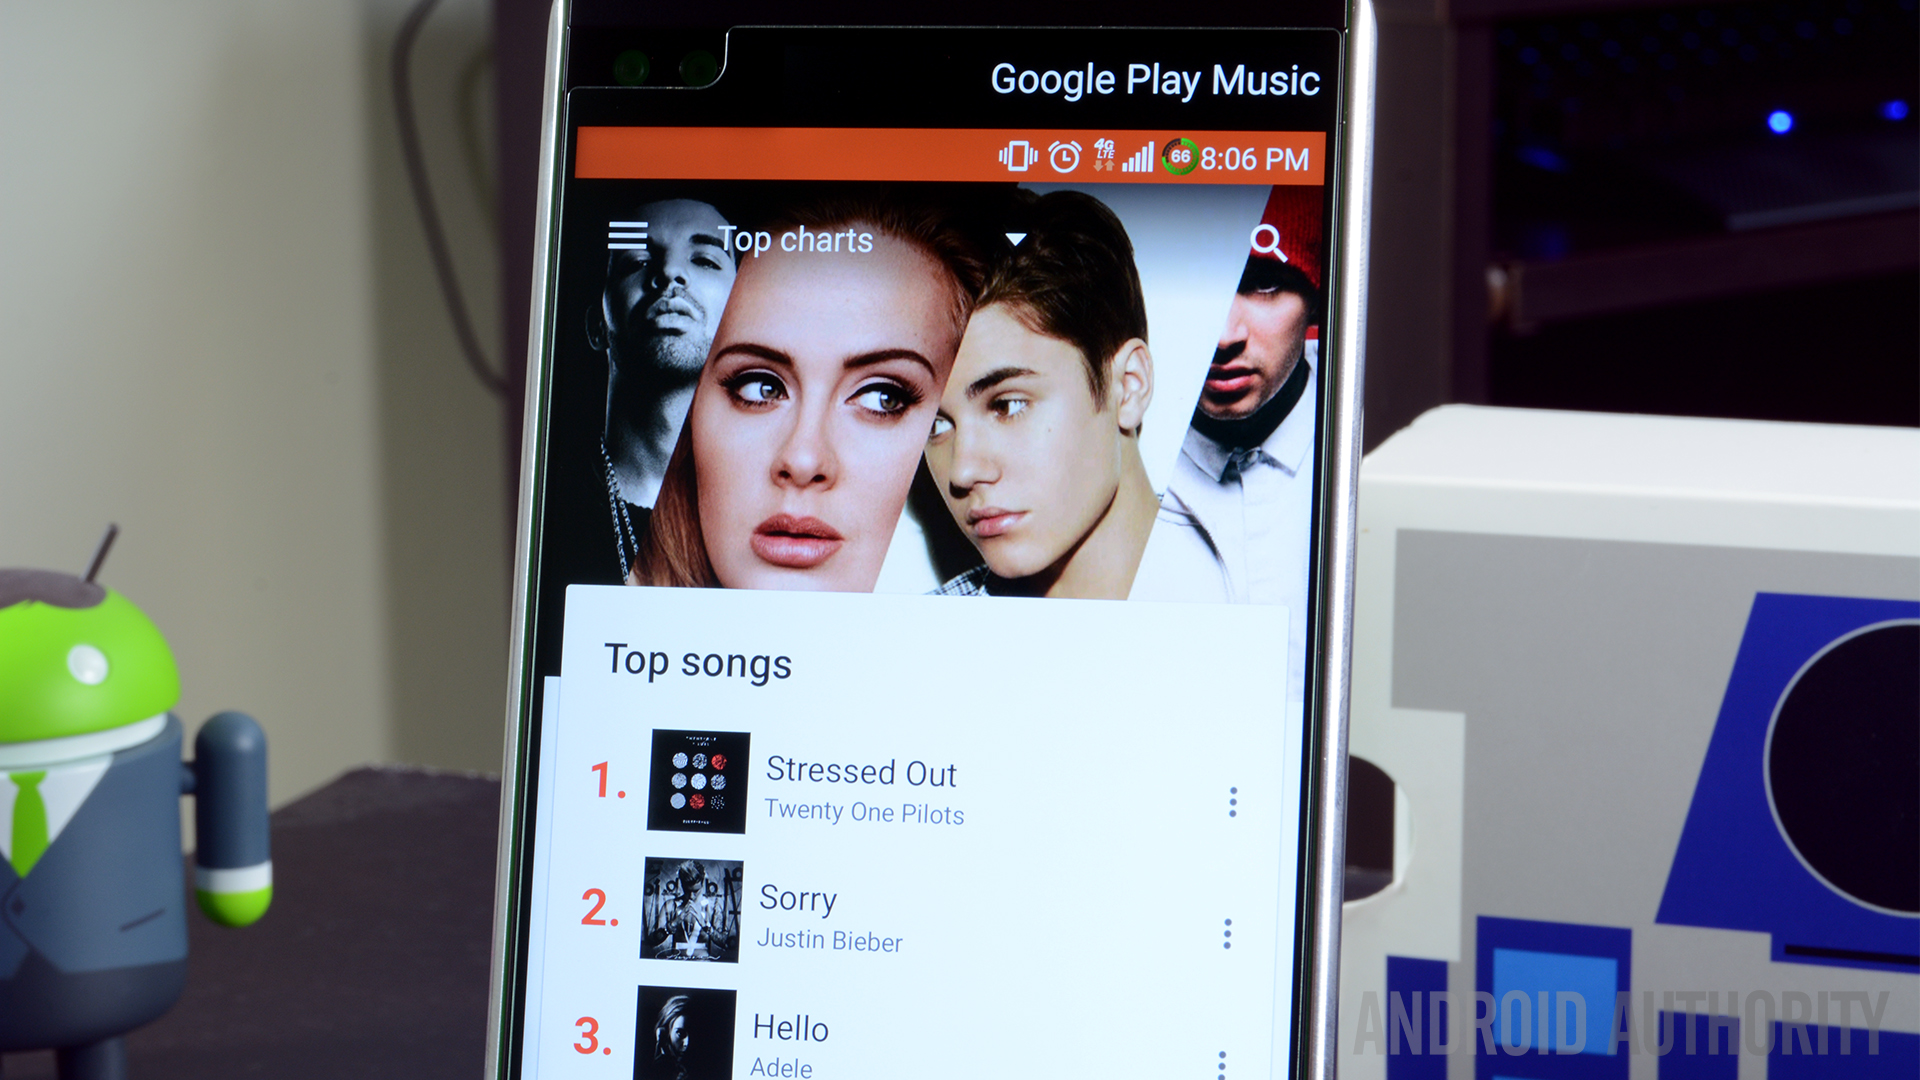 On a computer, open the Google Play Music website.
Locate the duplicate tracks in your library.